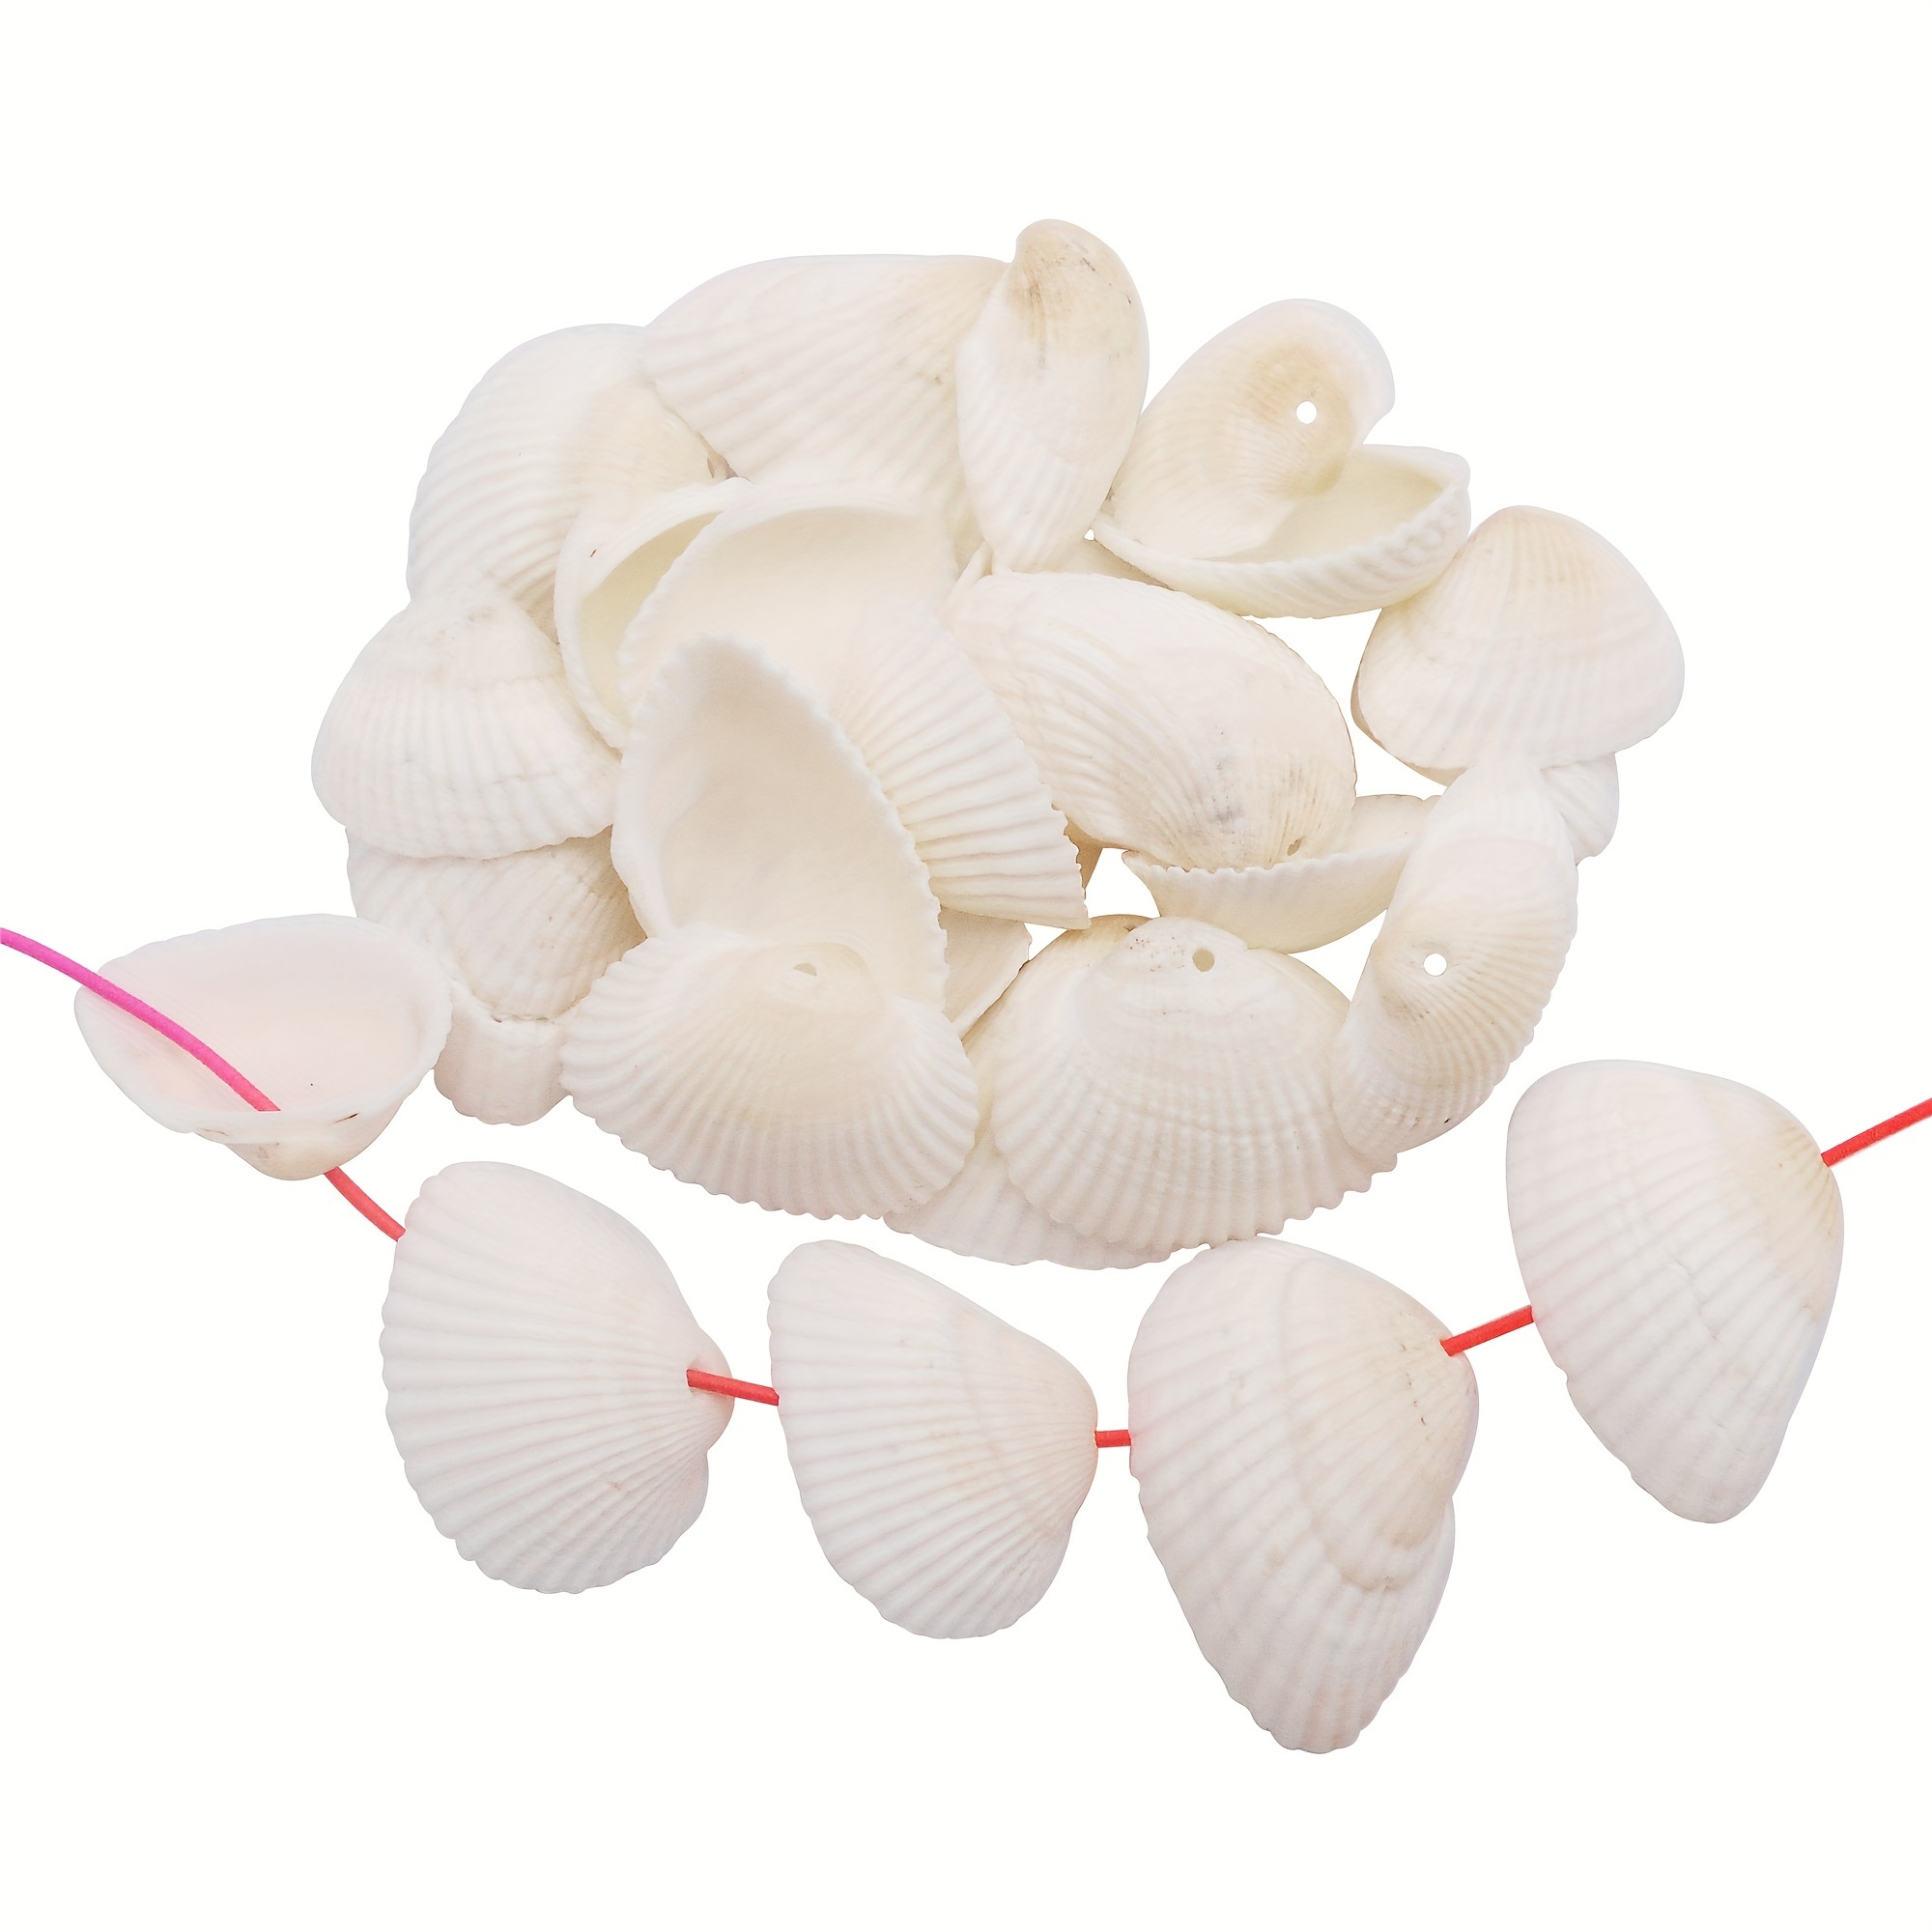 

30pcs Seashell With Hole Charms Conch Scallop Sea Shells Pendants For Jewelry Craft Wind Chime Making Diy Accessories